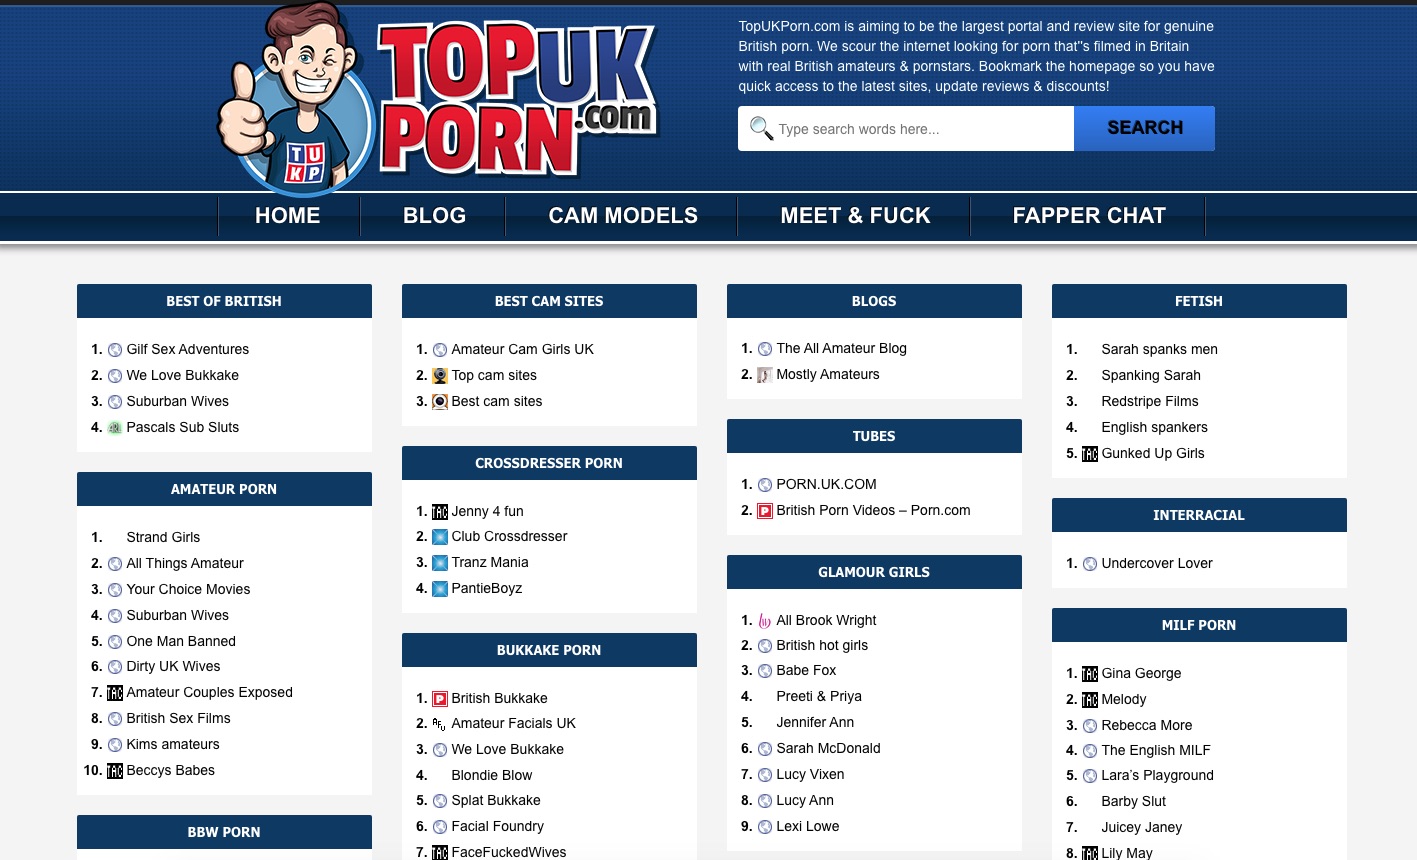 Find the best British porn sites at TopUKPorn hq image